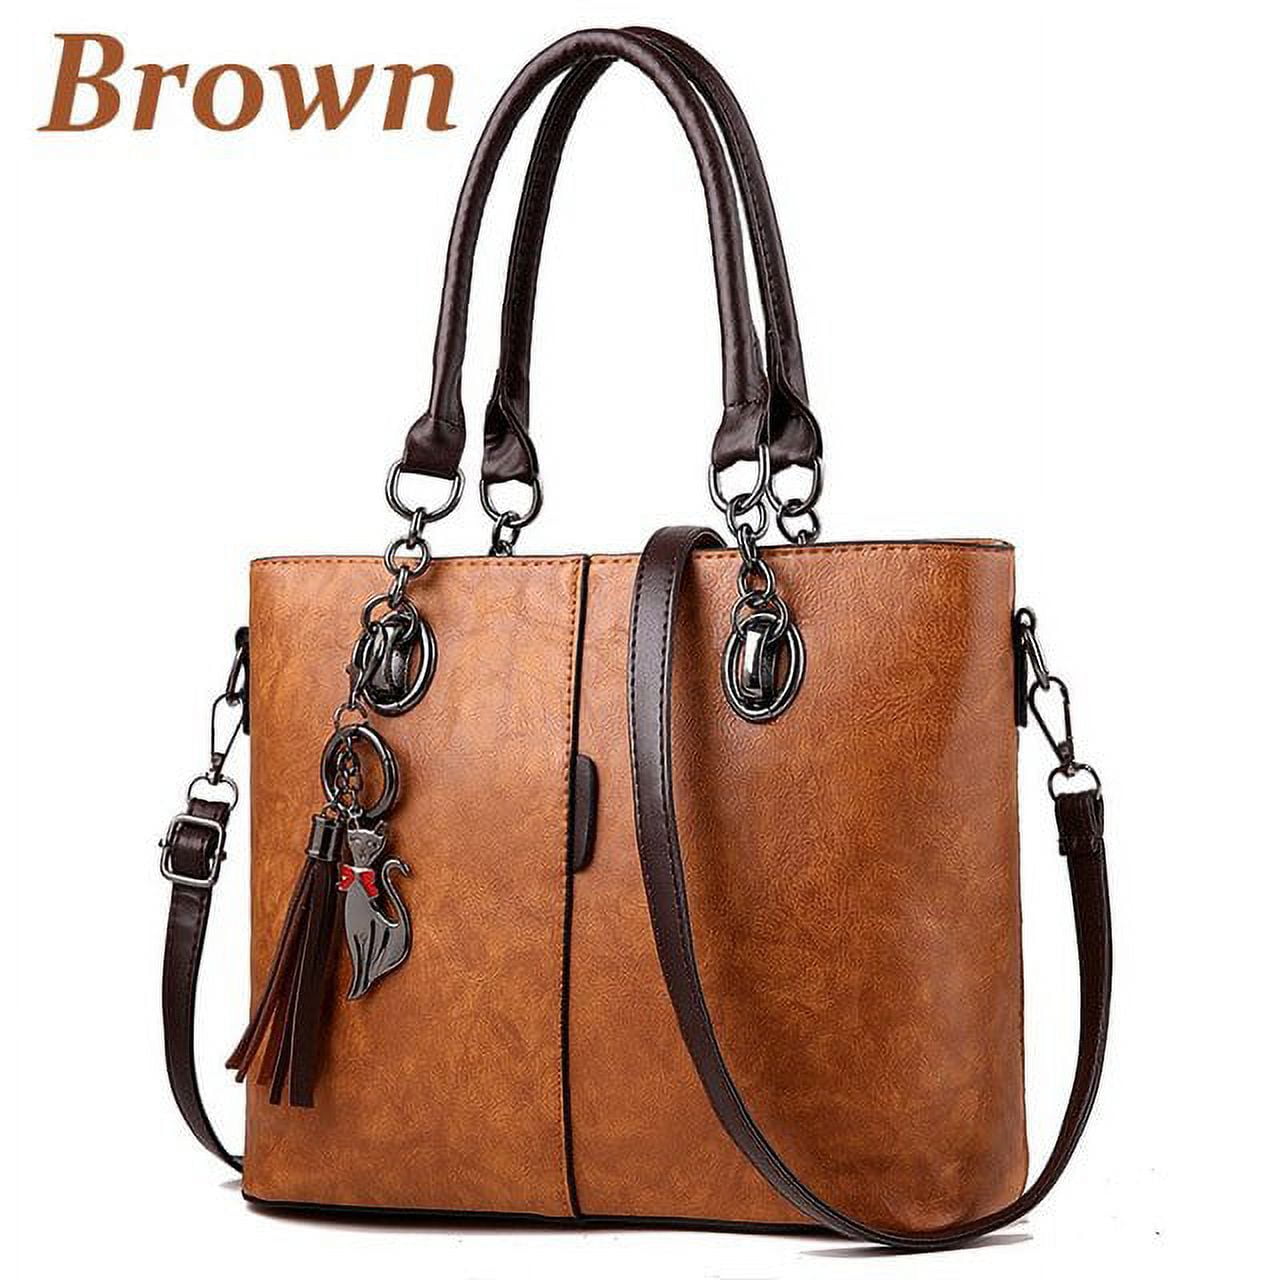 Brown Suede Bags at Different Price Points - ANNIE B.